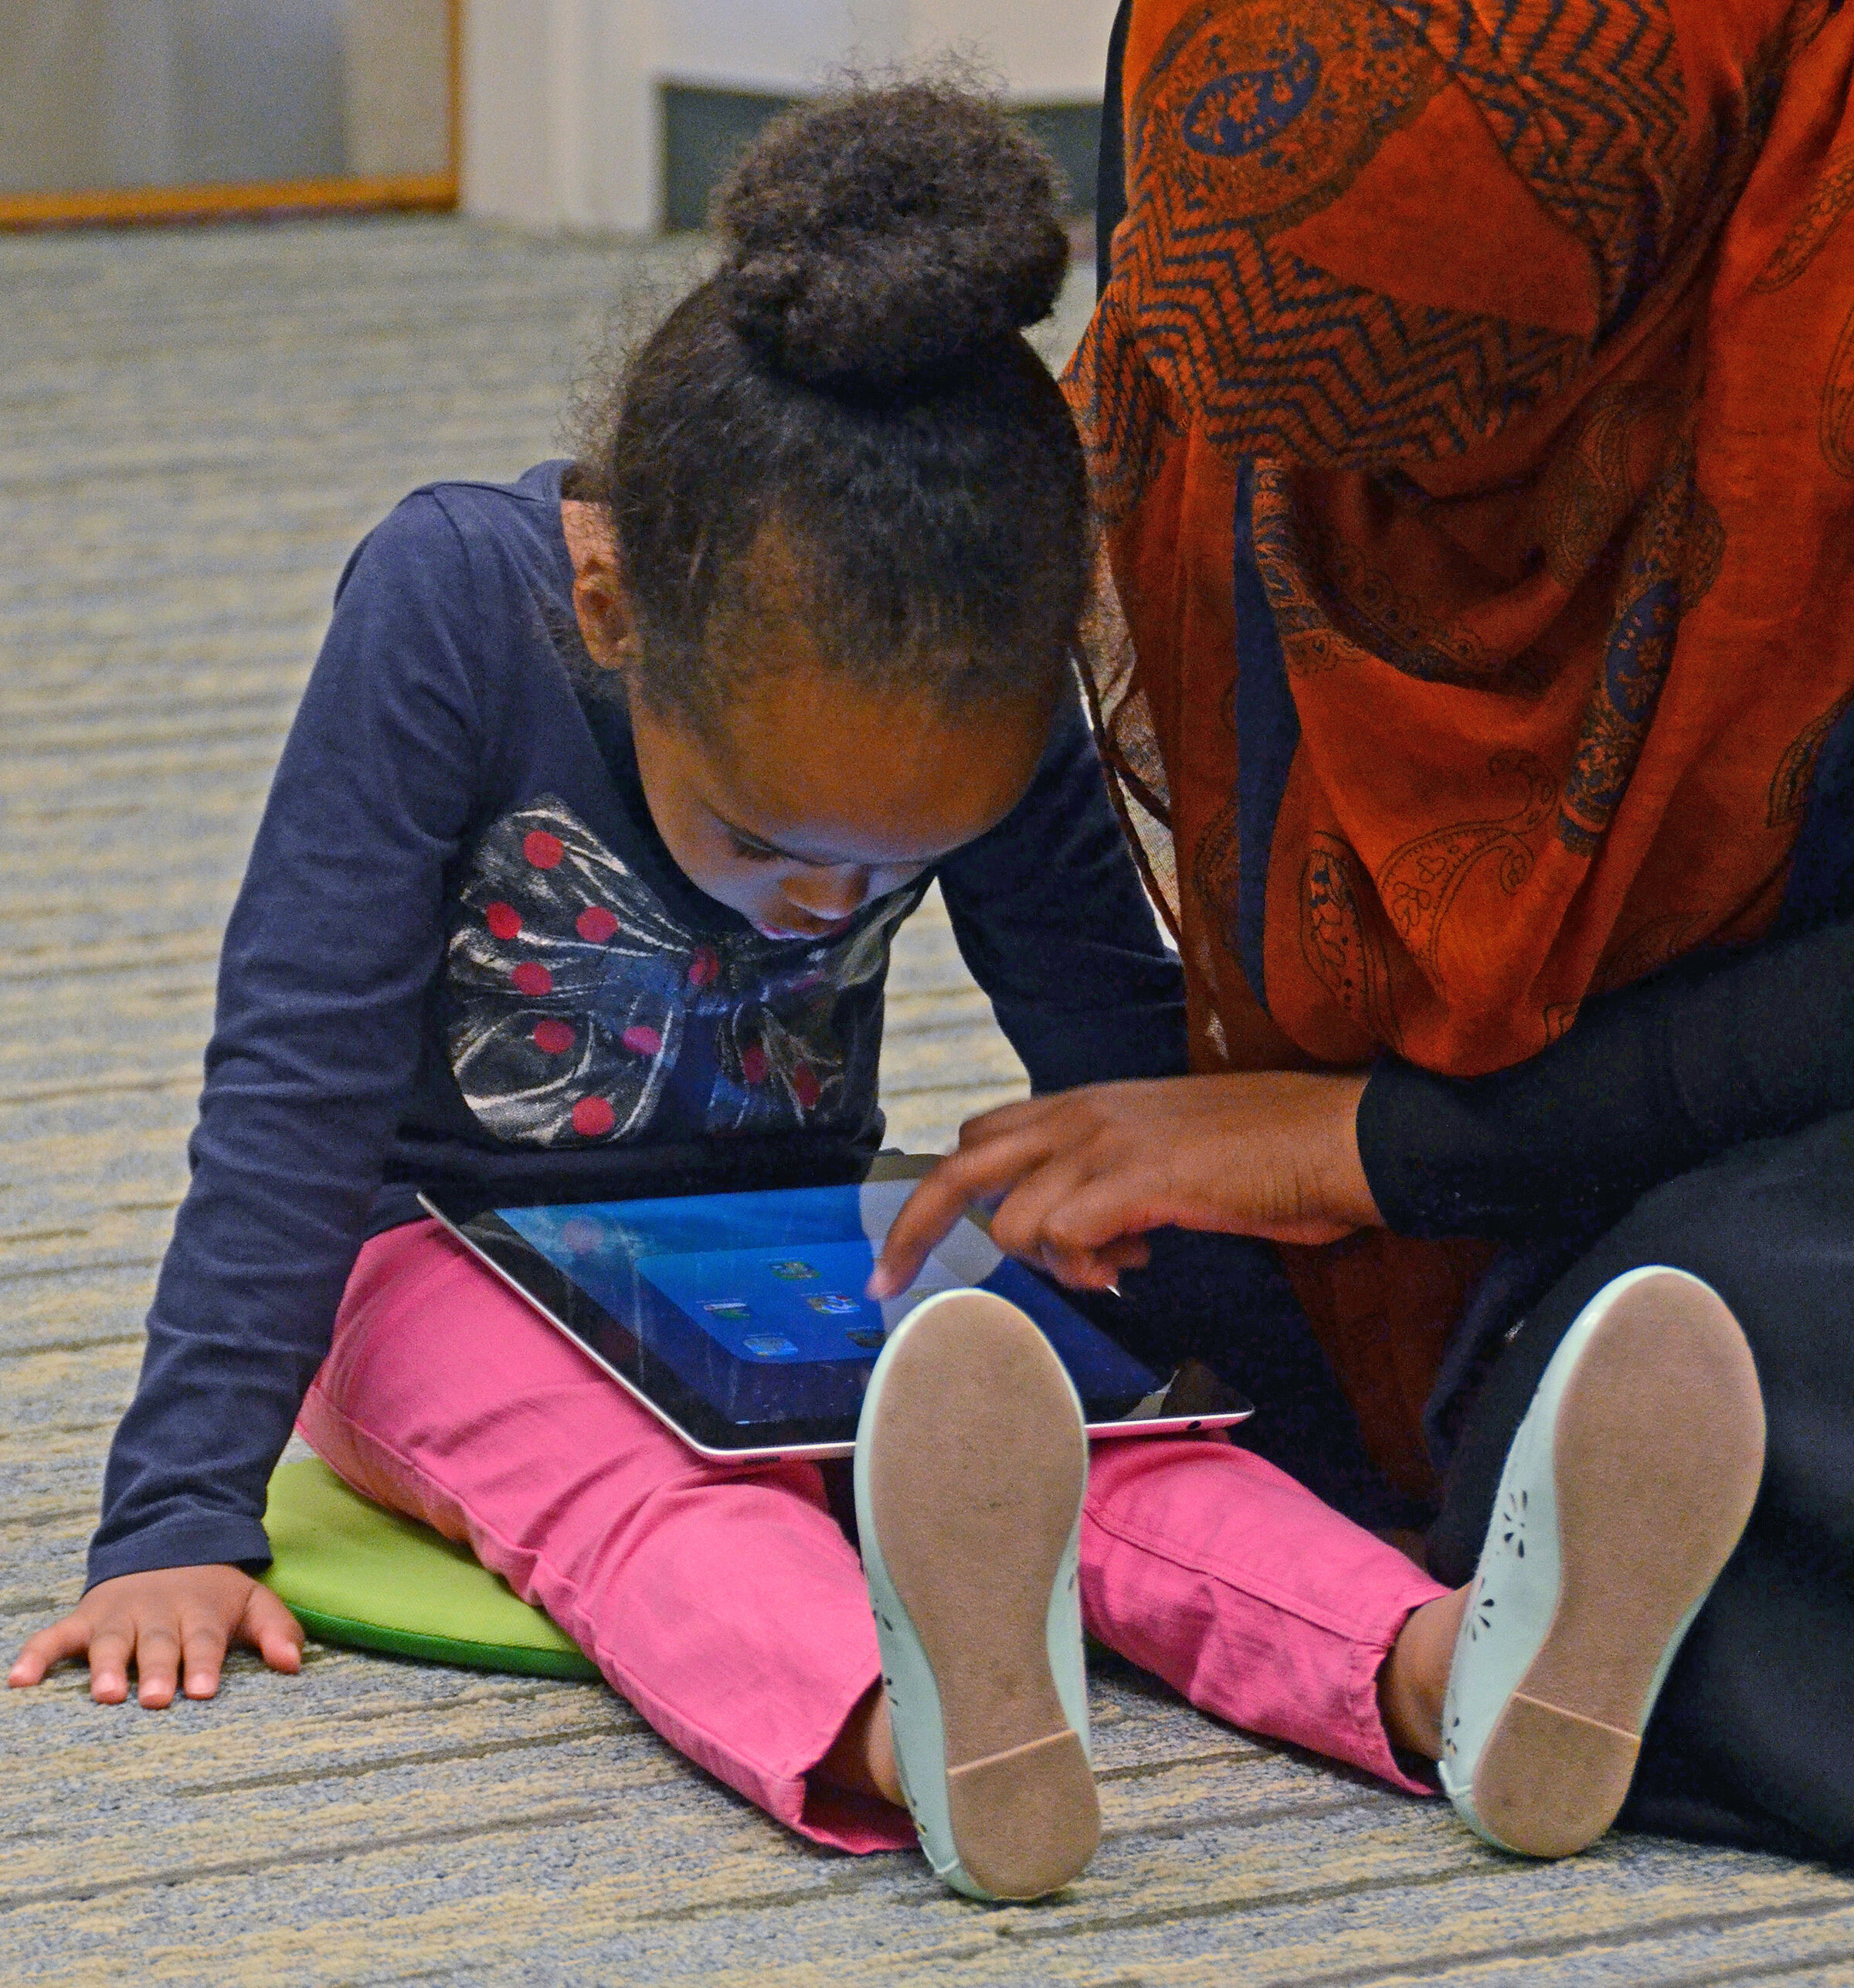 A Somali mom and child using the digital resources at the Dakota County Library (Photo: Dakota County Library)